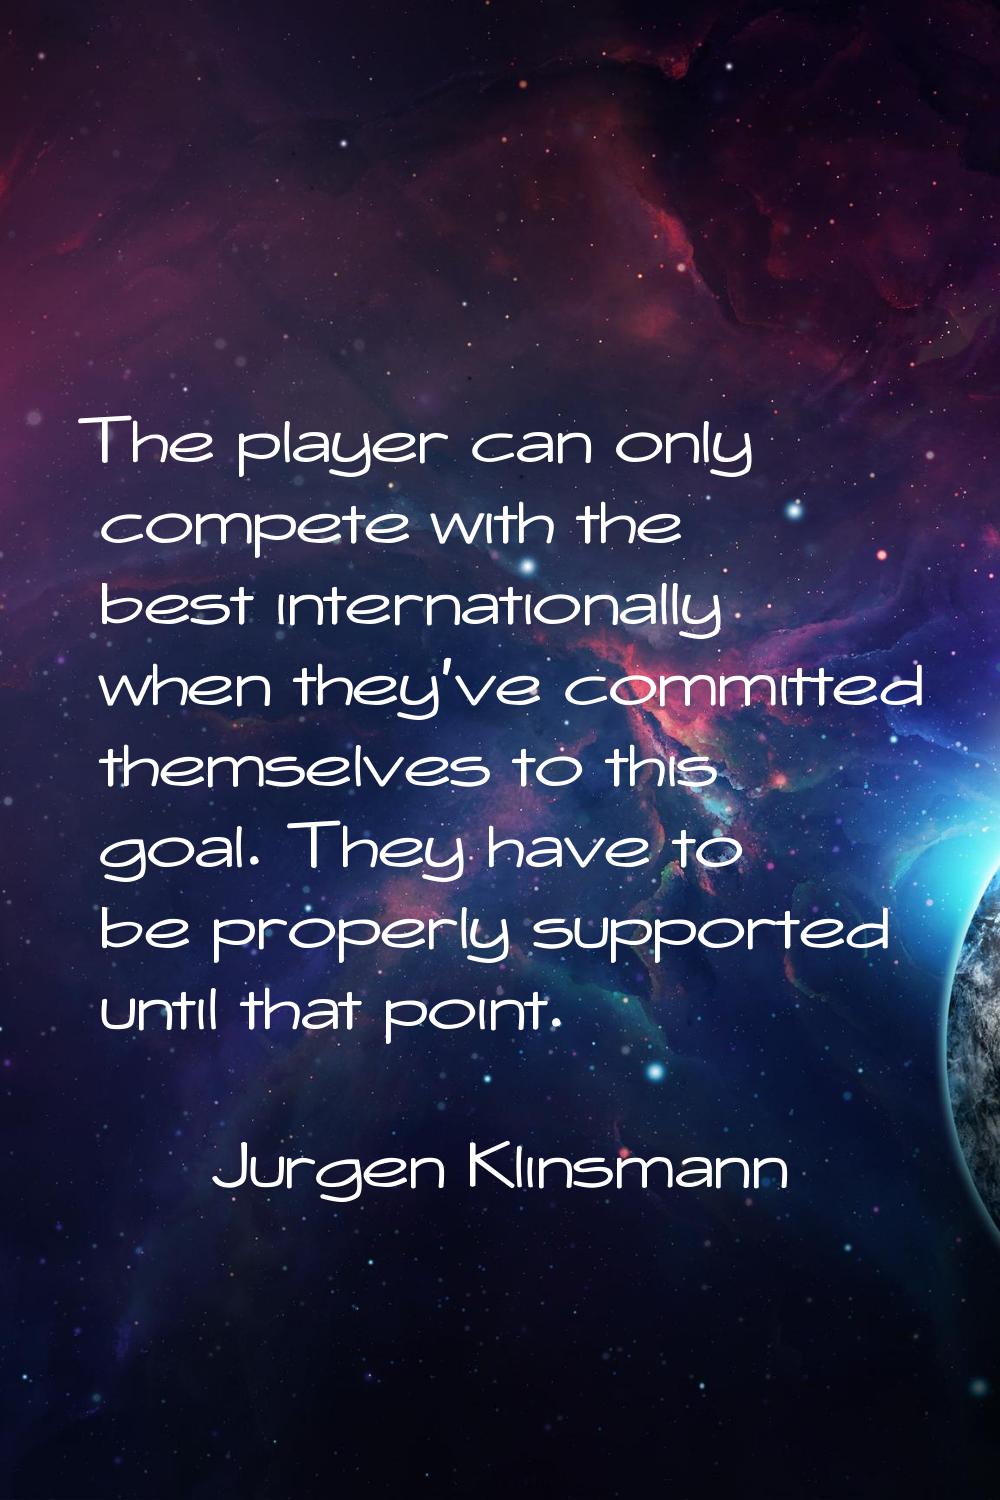 The player can only compete with the best internationally when they've committed themselves to this